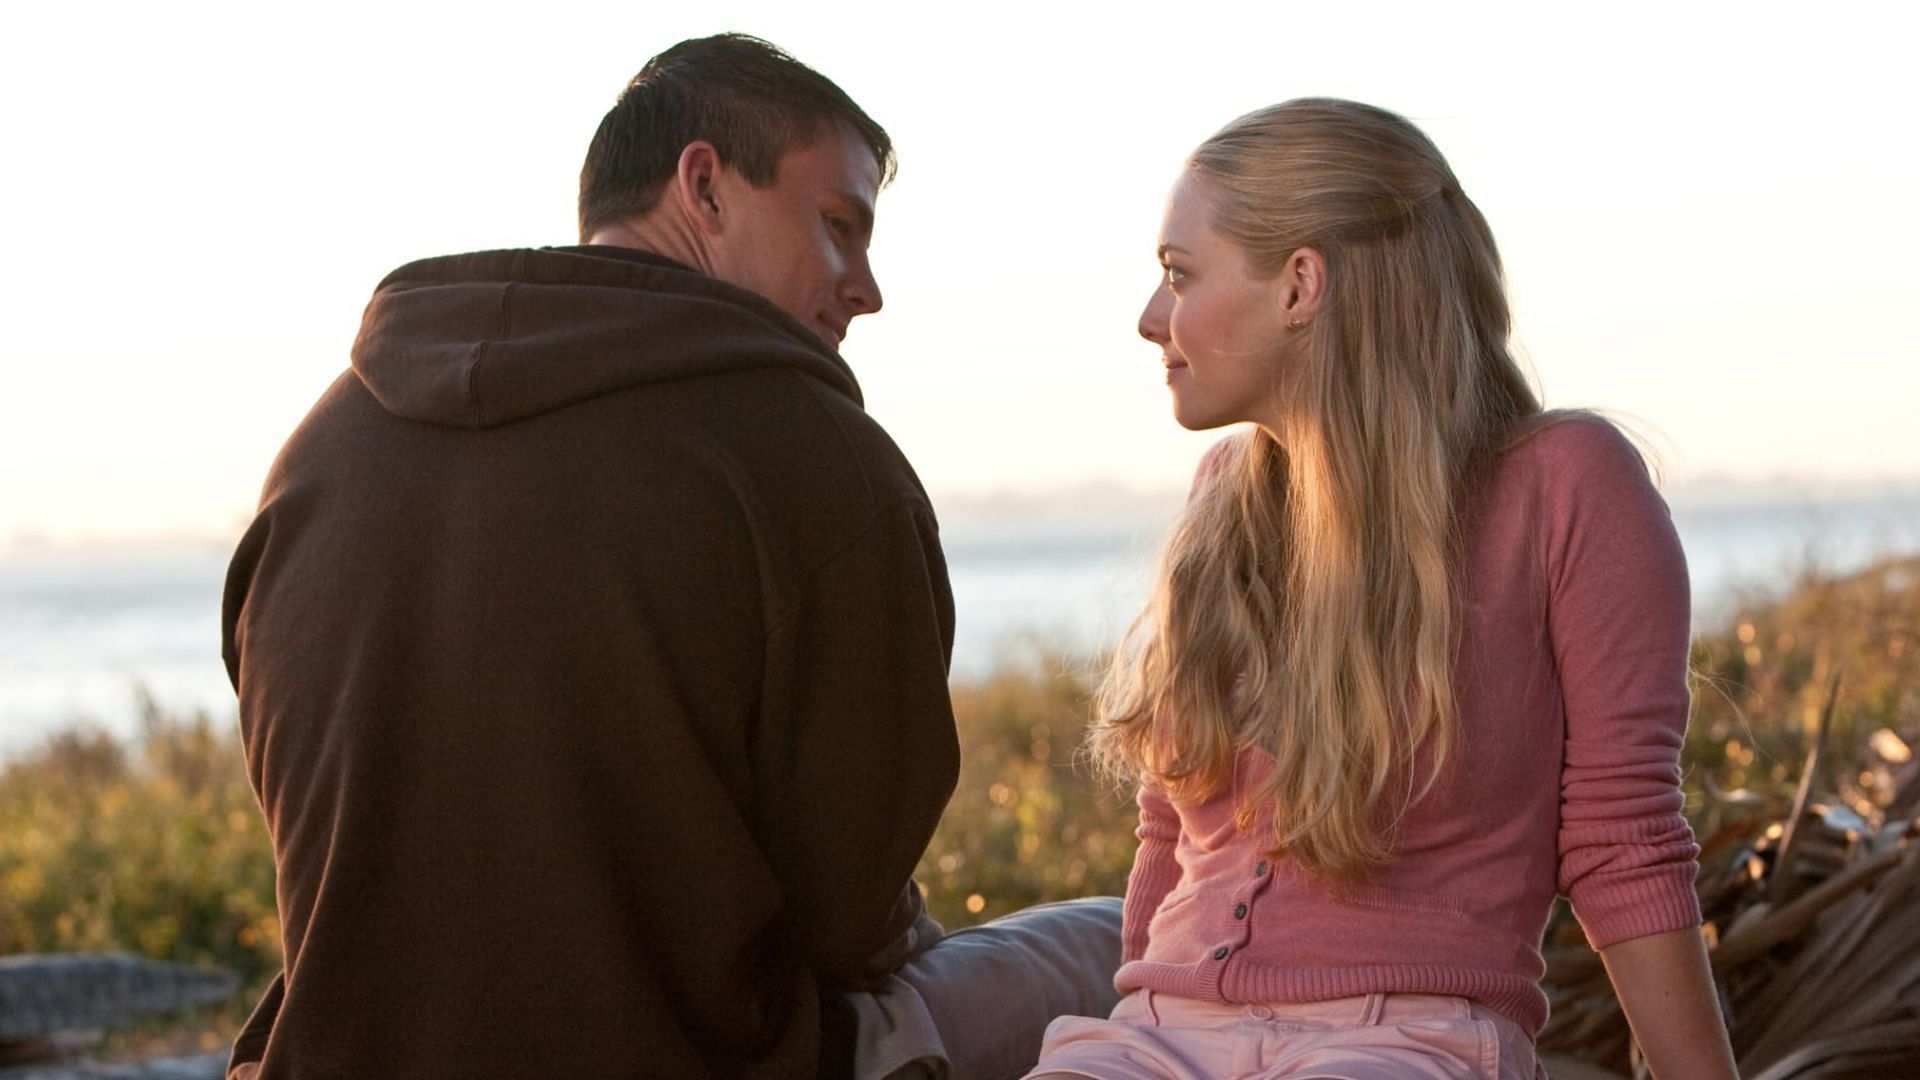 Channing Tatum and Amanda Seyfried have great chemistry in this second-chance romance movie (Image via Dear John, LLC)